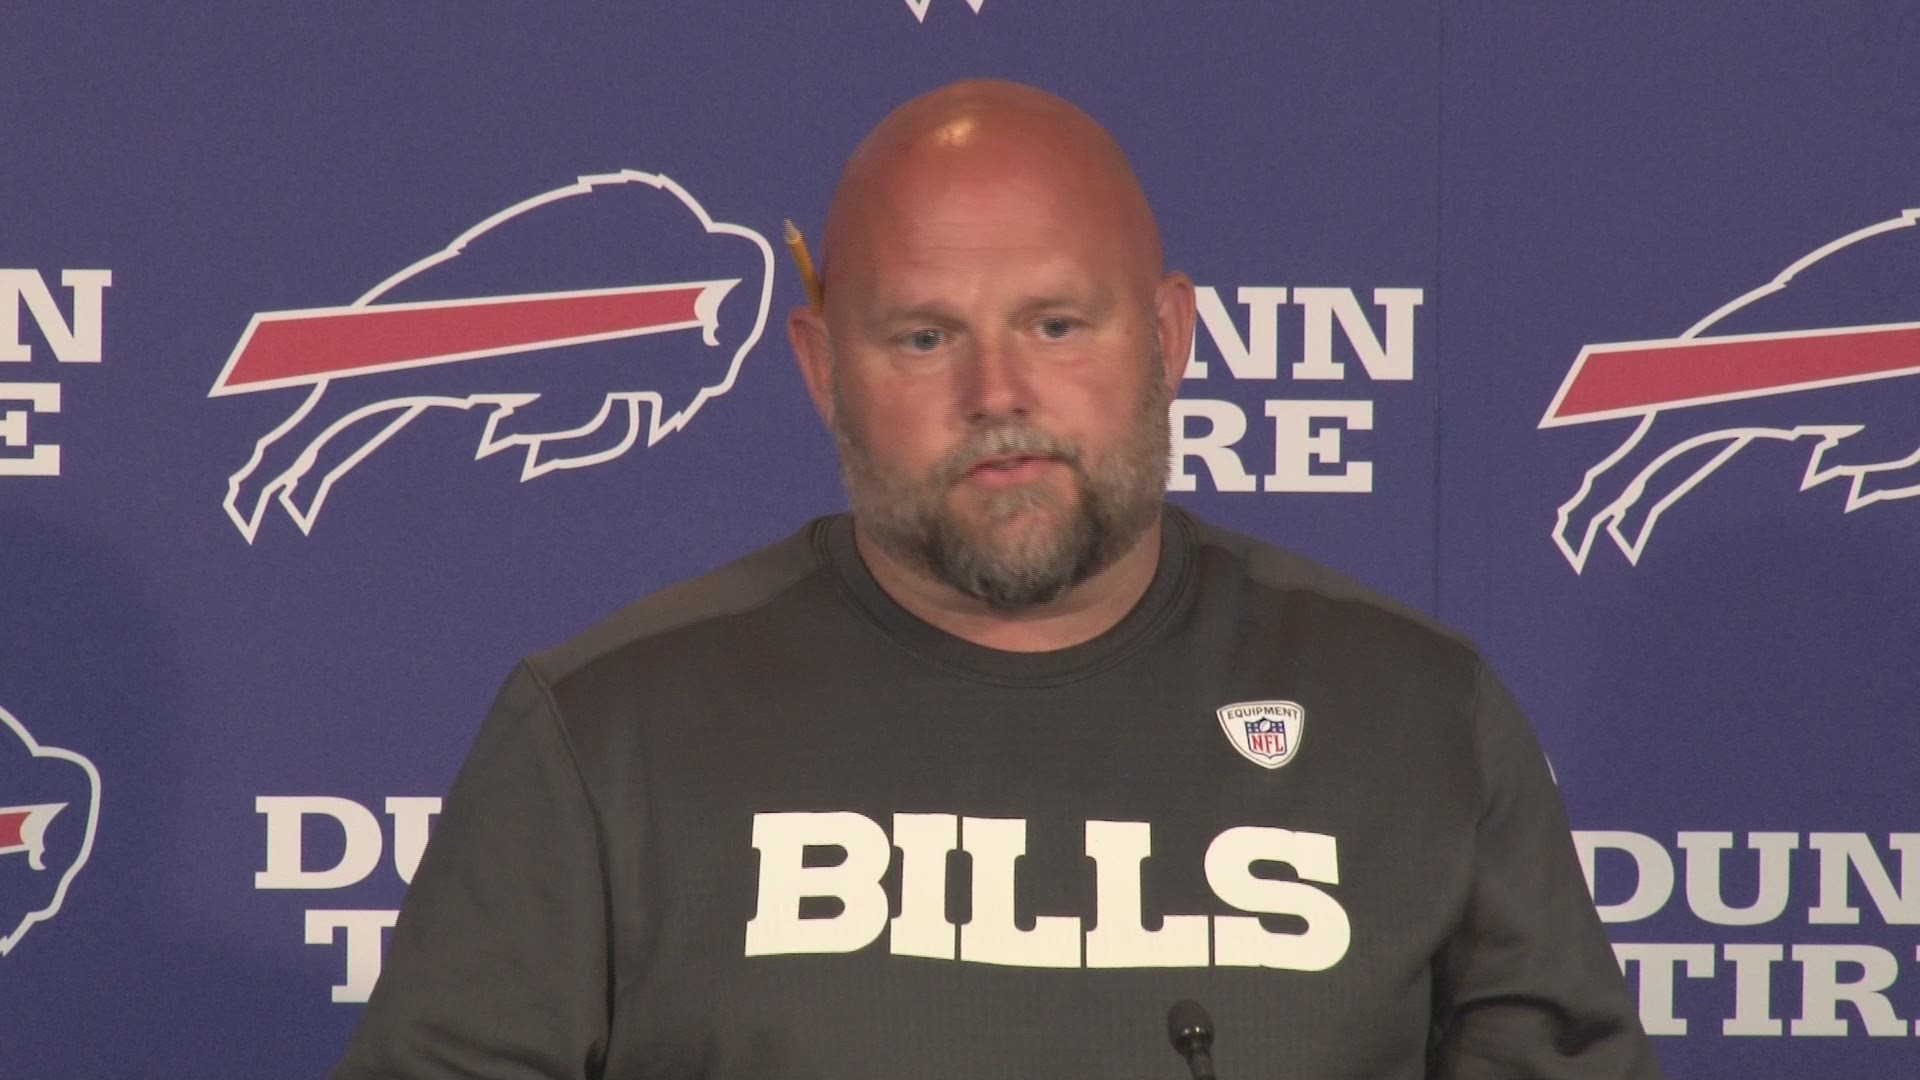 The Bills will have a much different look on offense this season under Brian Daboll than they did a year ago.